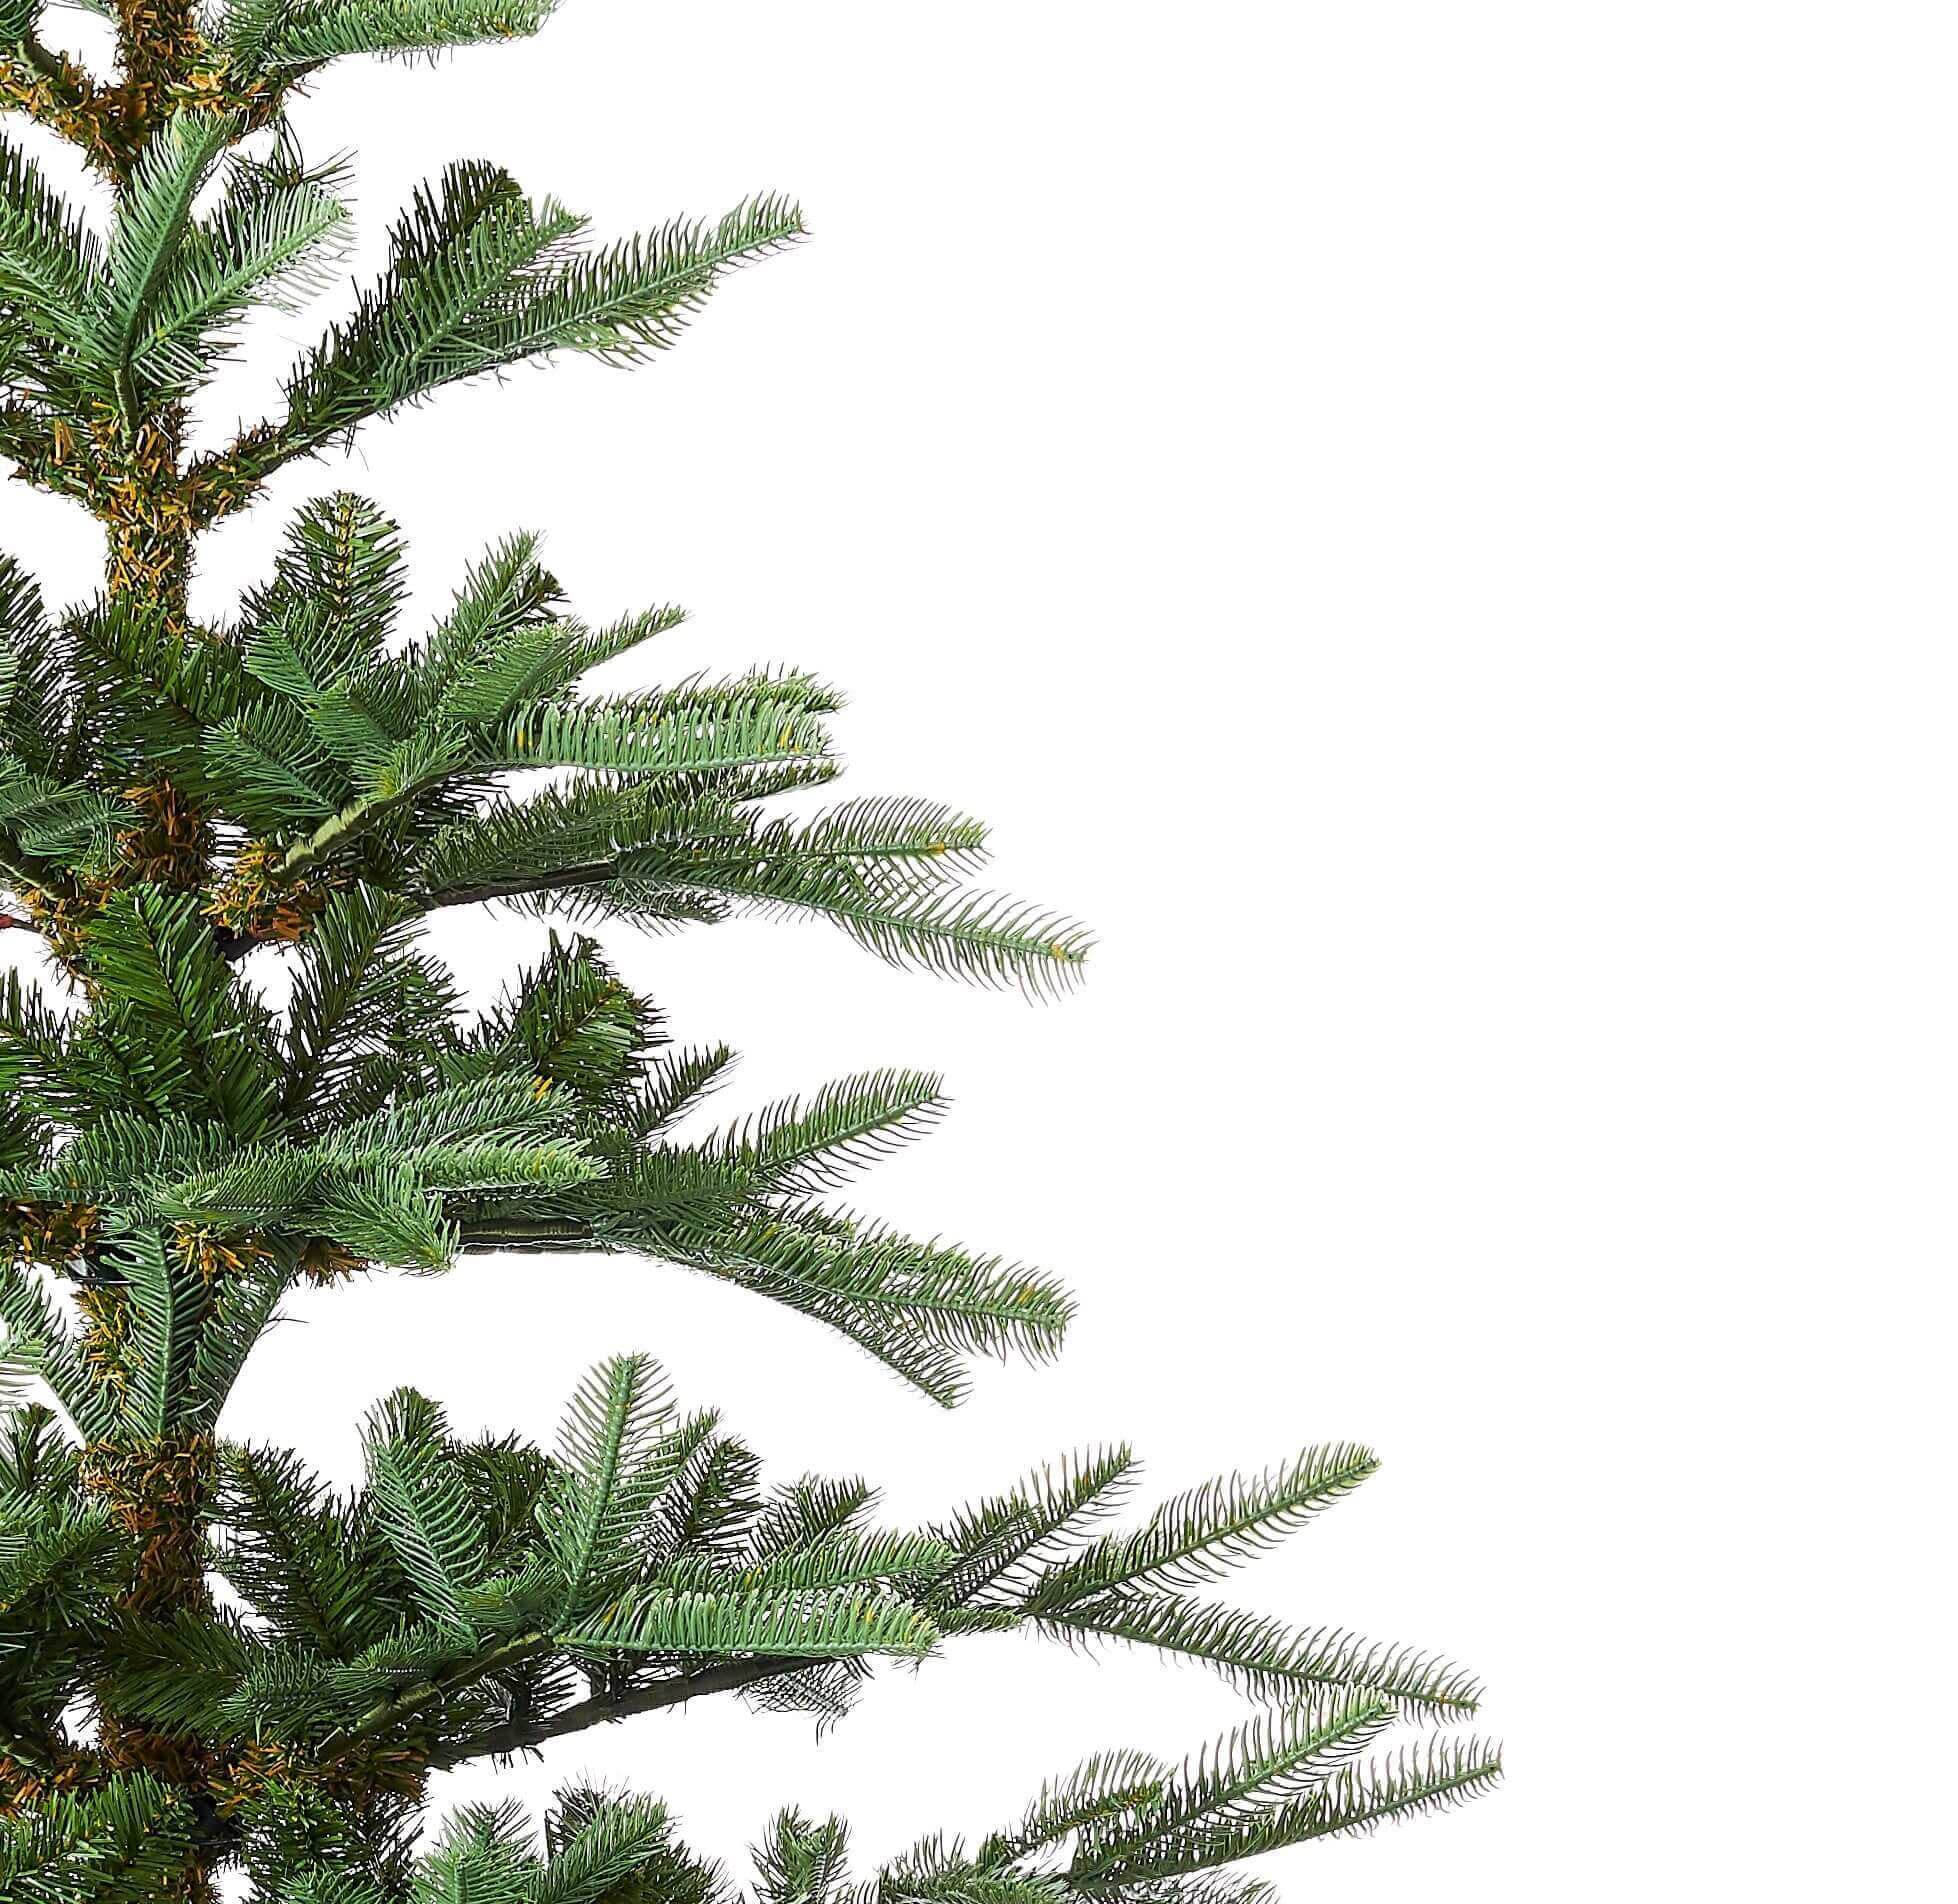 King of Christmas (OPEN BOX) 8' KING NOBLE FIR ARTIFICIAL TREE WITH 600 WARM WHITE LED LIGHTS, FINAL SALE